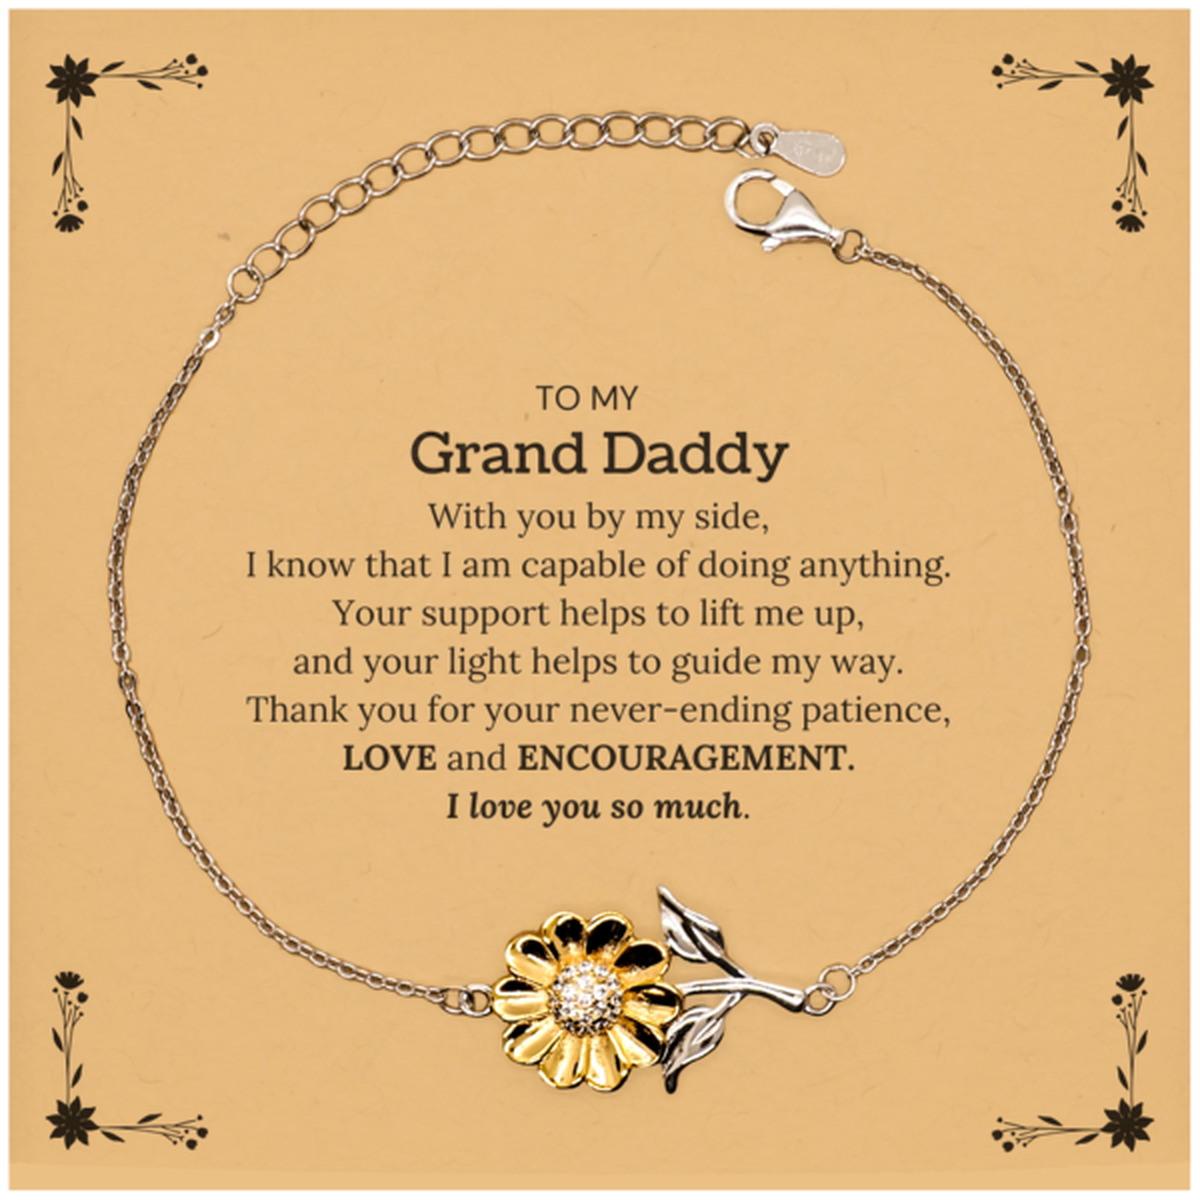 Appreciation Grand Daddy Sunflower Bracelet Gifts, To My Grand Daddy Birthday Christmas Wedding Keepsake Gifts for Grand Daddy With you by my side, I know that I am capable of doing anything. I love you so much